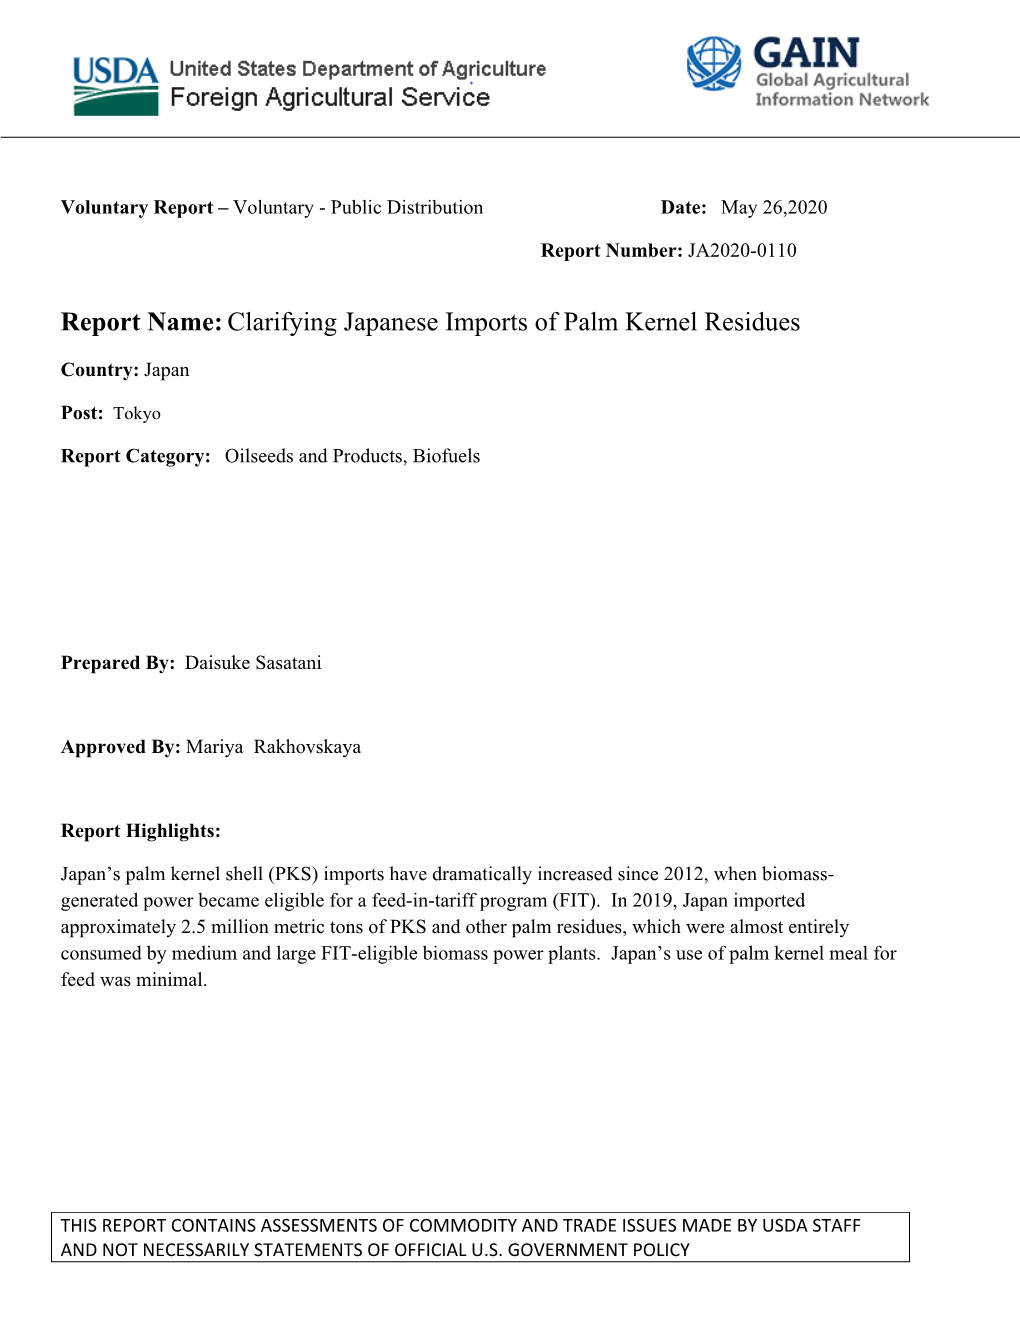 Report Name:Clarifying Japanese Imports of Palm Kernel Residues